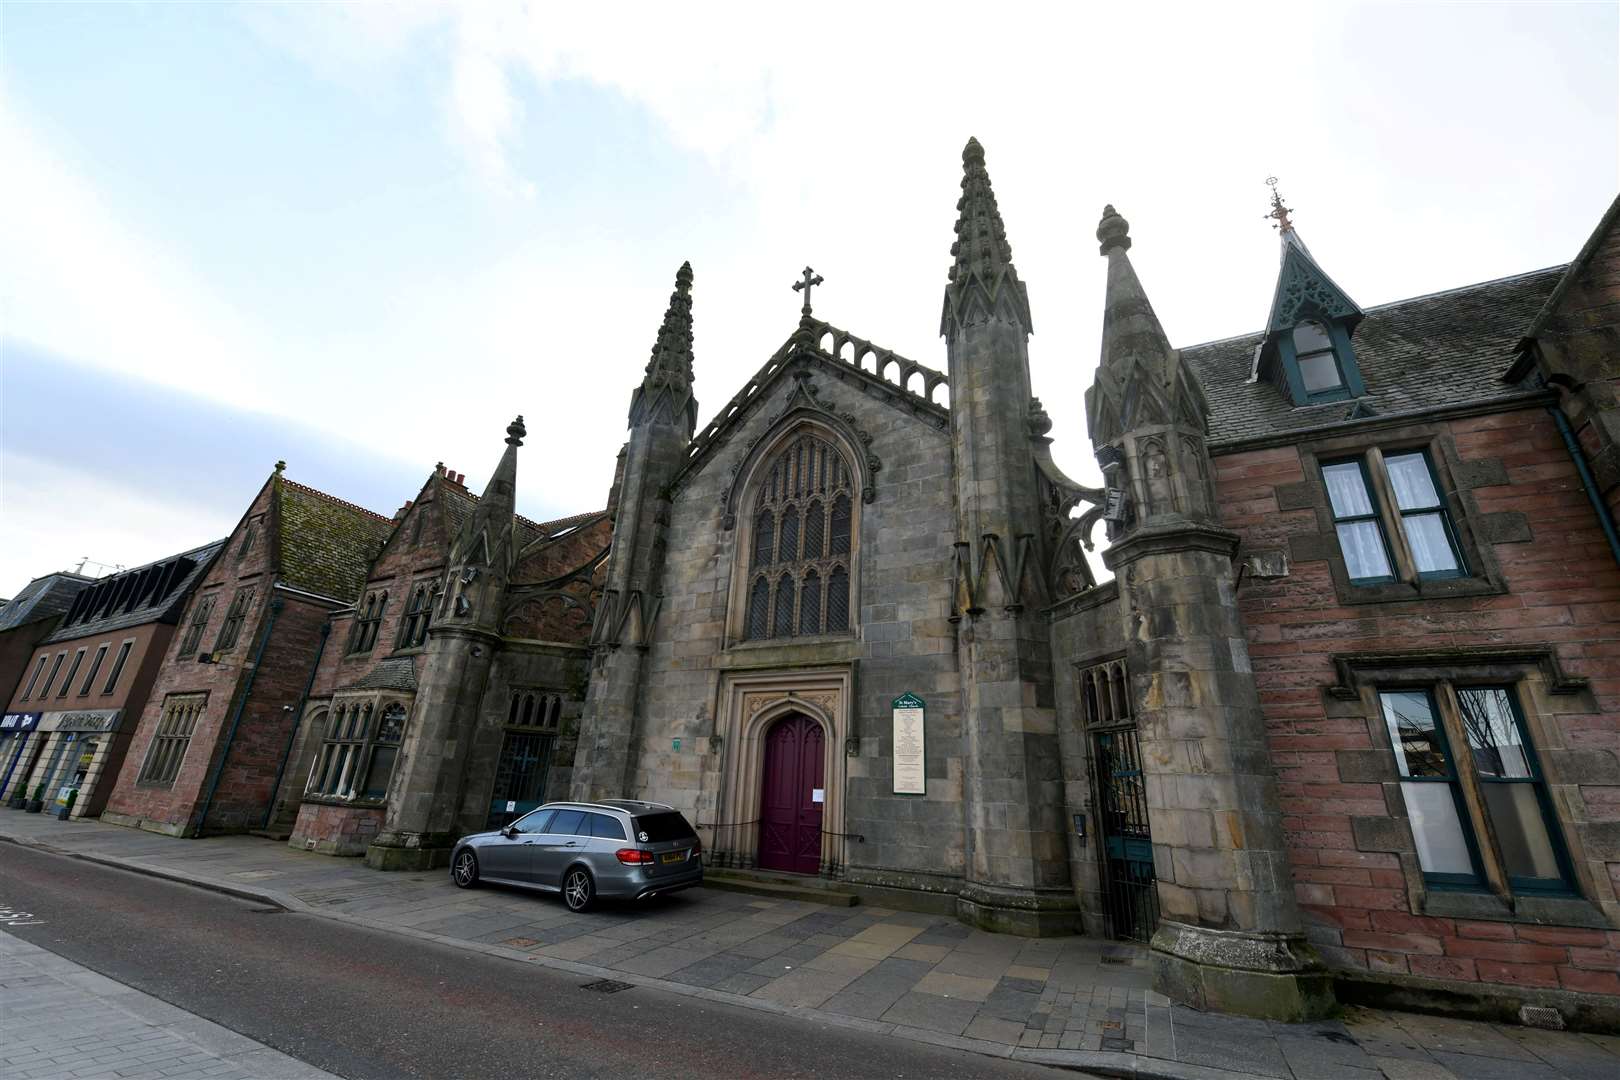 Police are carrying out inquiries following a theft at St Mary's Church in Inverness.